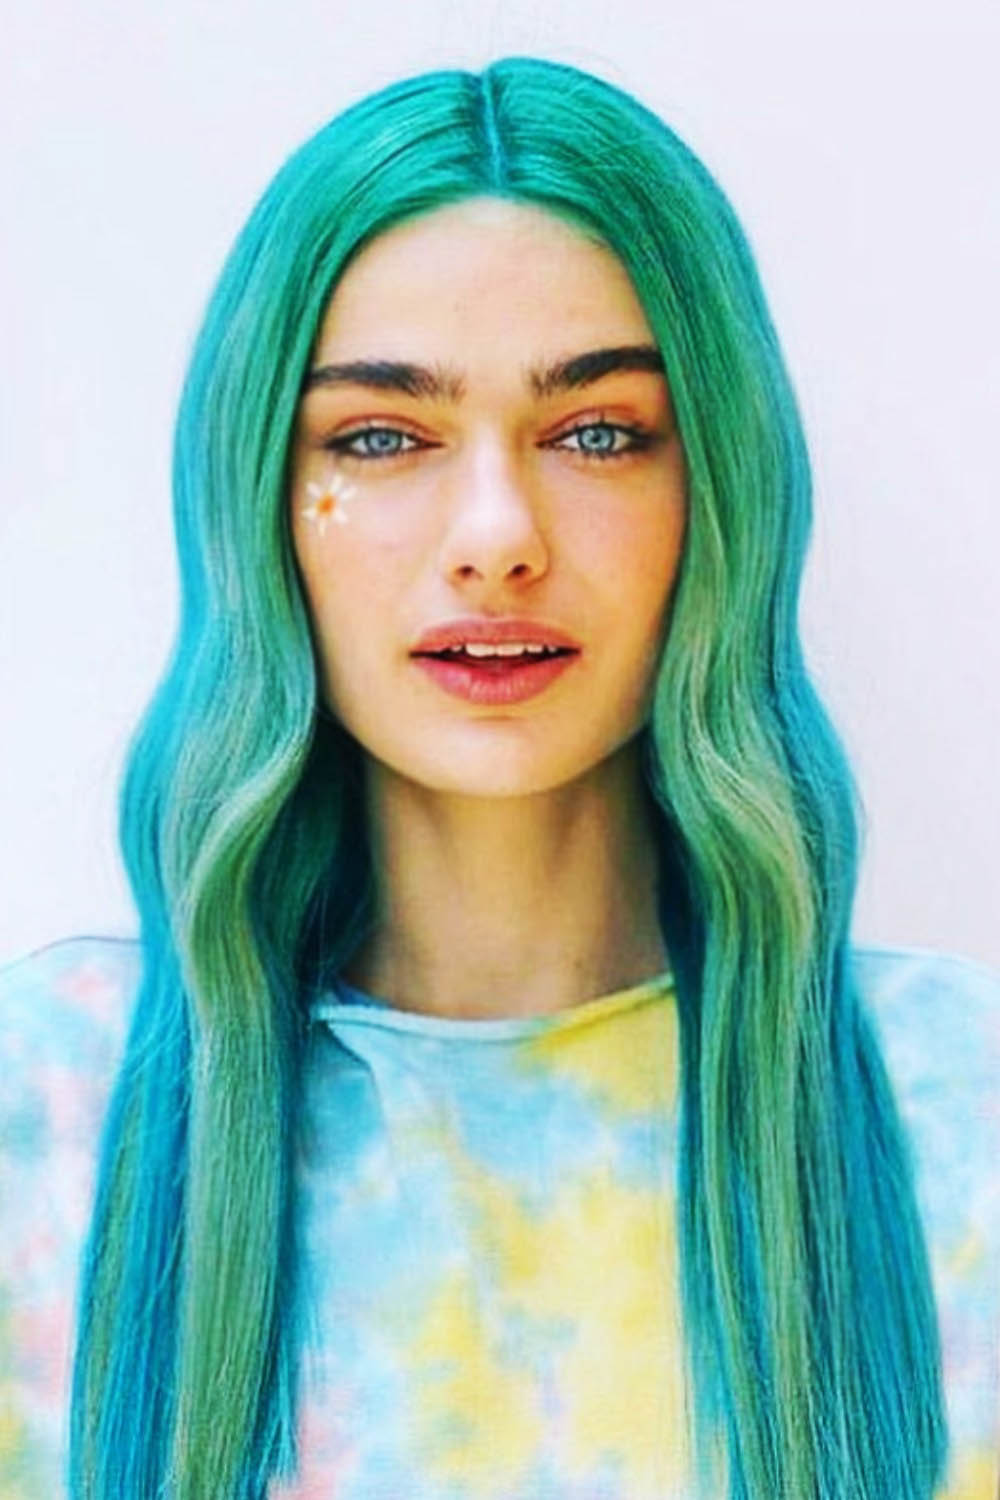 This Korean Model Proves You Can Still Be Stylish Even With Green Hair